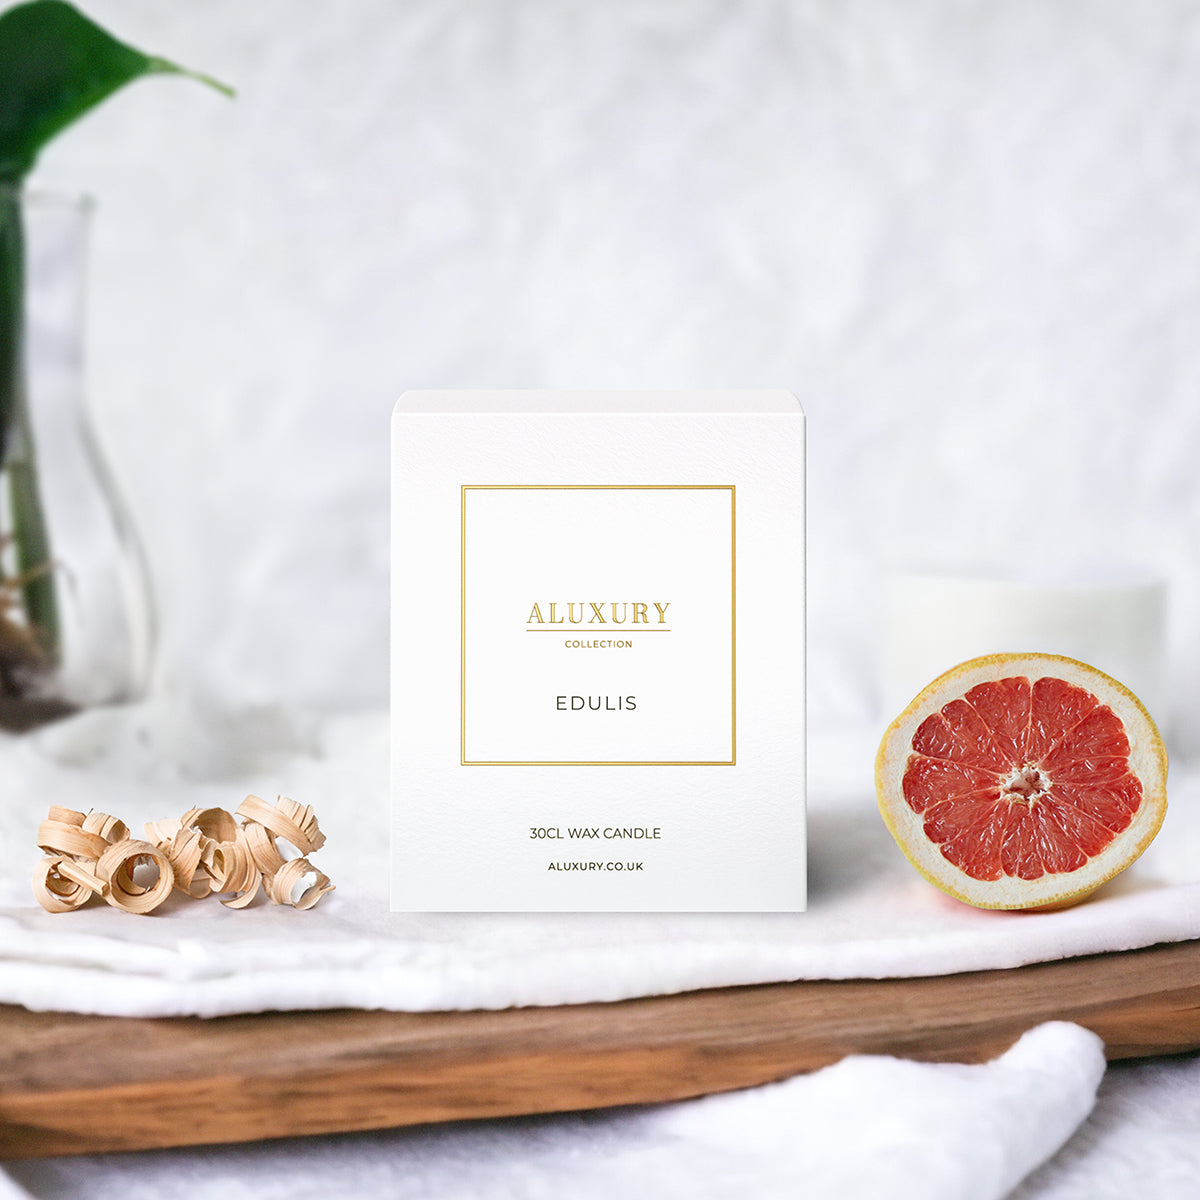 Edulis 30cl candle box by ALUXURY